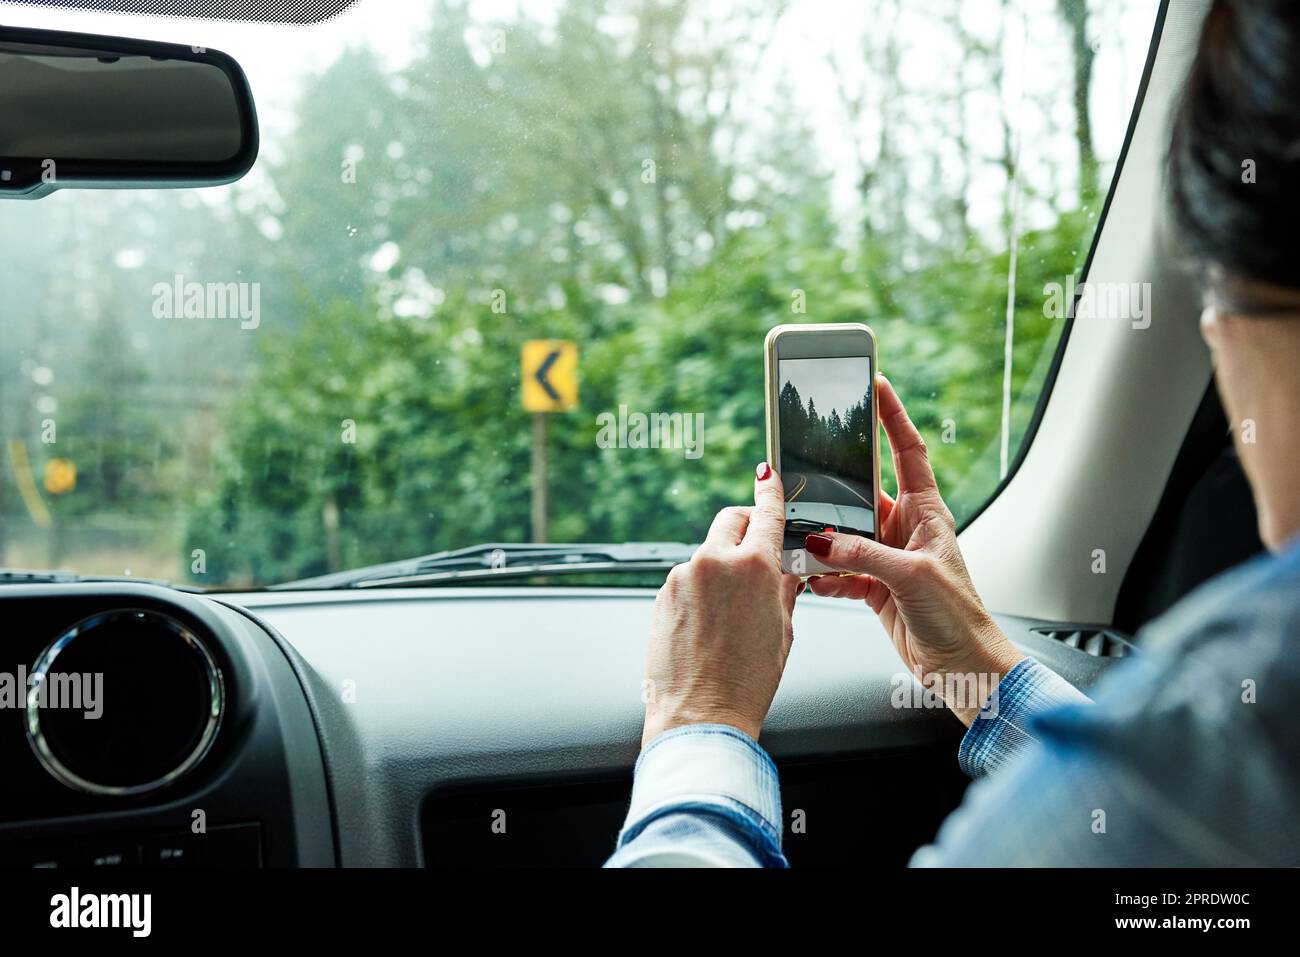 Taking pictures along the way. a passenger taking pictures while out on a road trip. Stock Photo